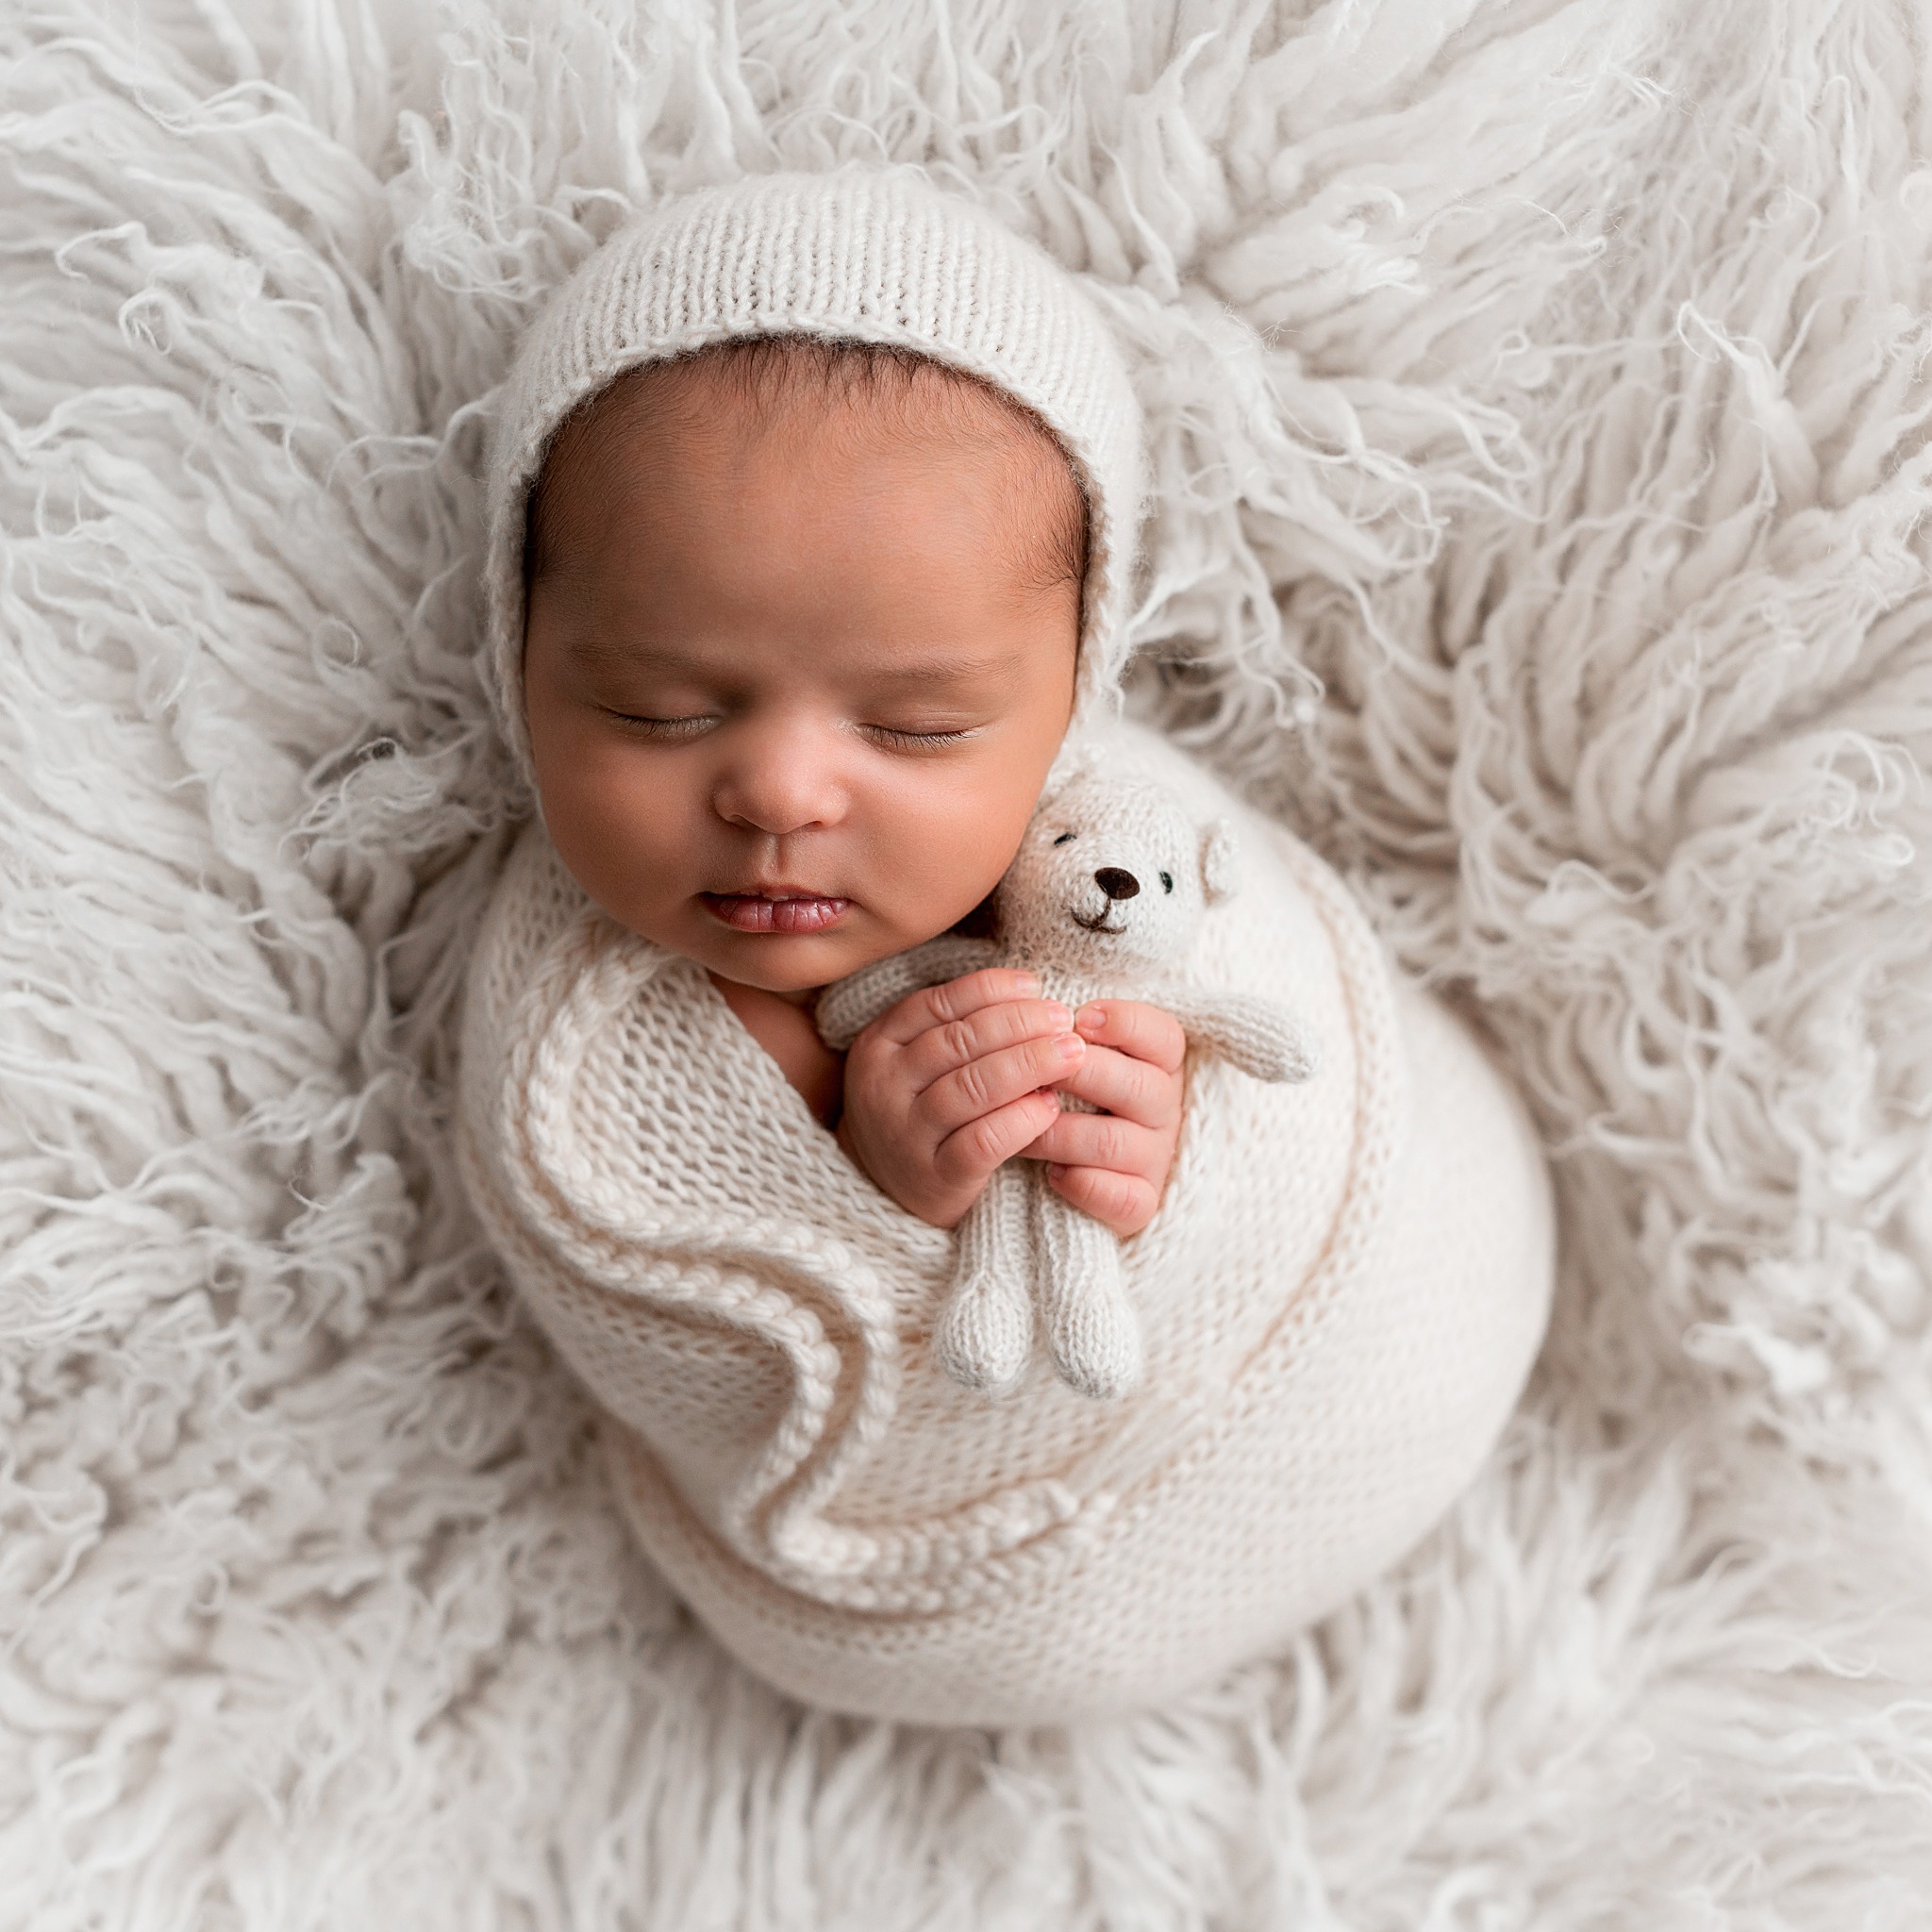 Newborn Photoshoot Wakefield. Sleeping newborn baby swaddled neatly in a cream knitted blanket and wearing a matching bonnet. He's nestled snug into a fluffy fur rug while holding a tiny teddy in his hands.